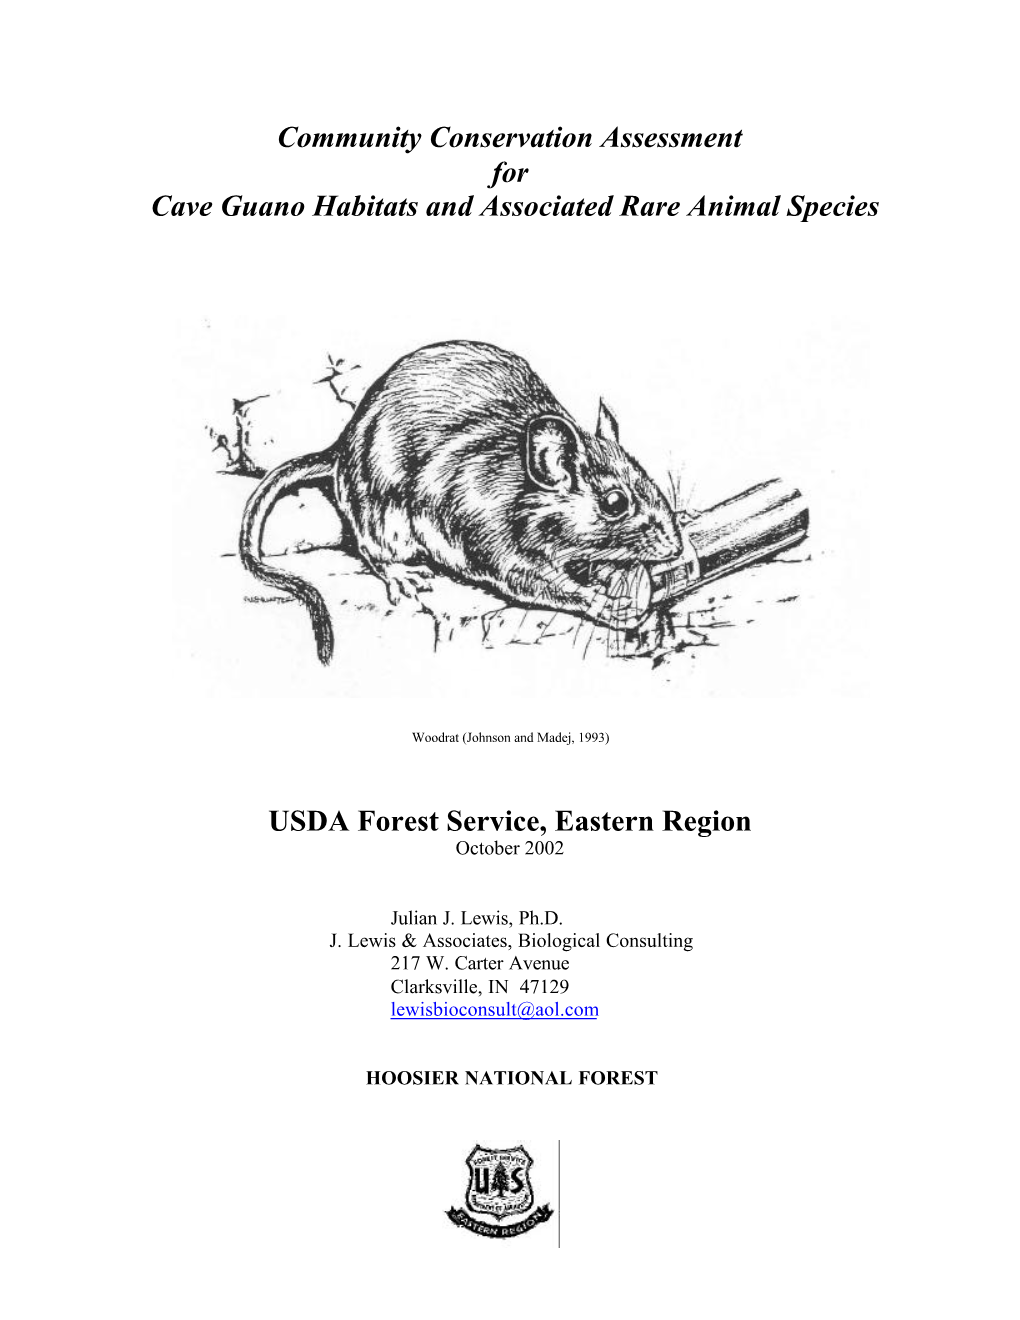 Community Conservation Assessment for Cave Guano Habitats and Associated Rare Animal Species USDA Forest Service, Eastern Region